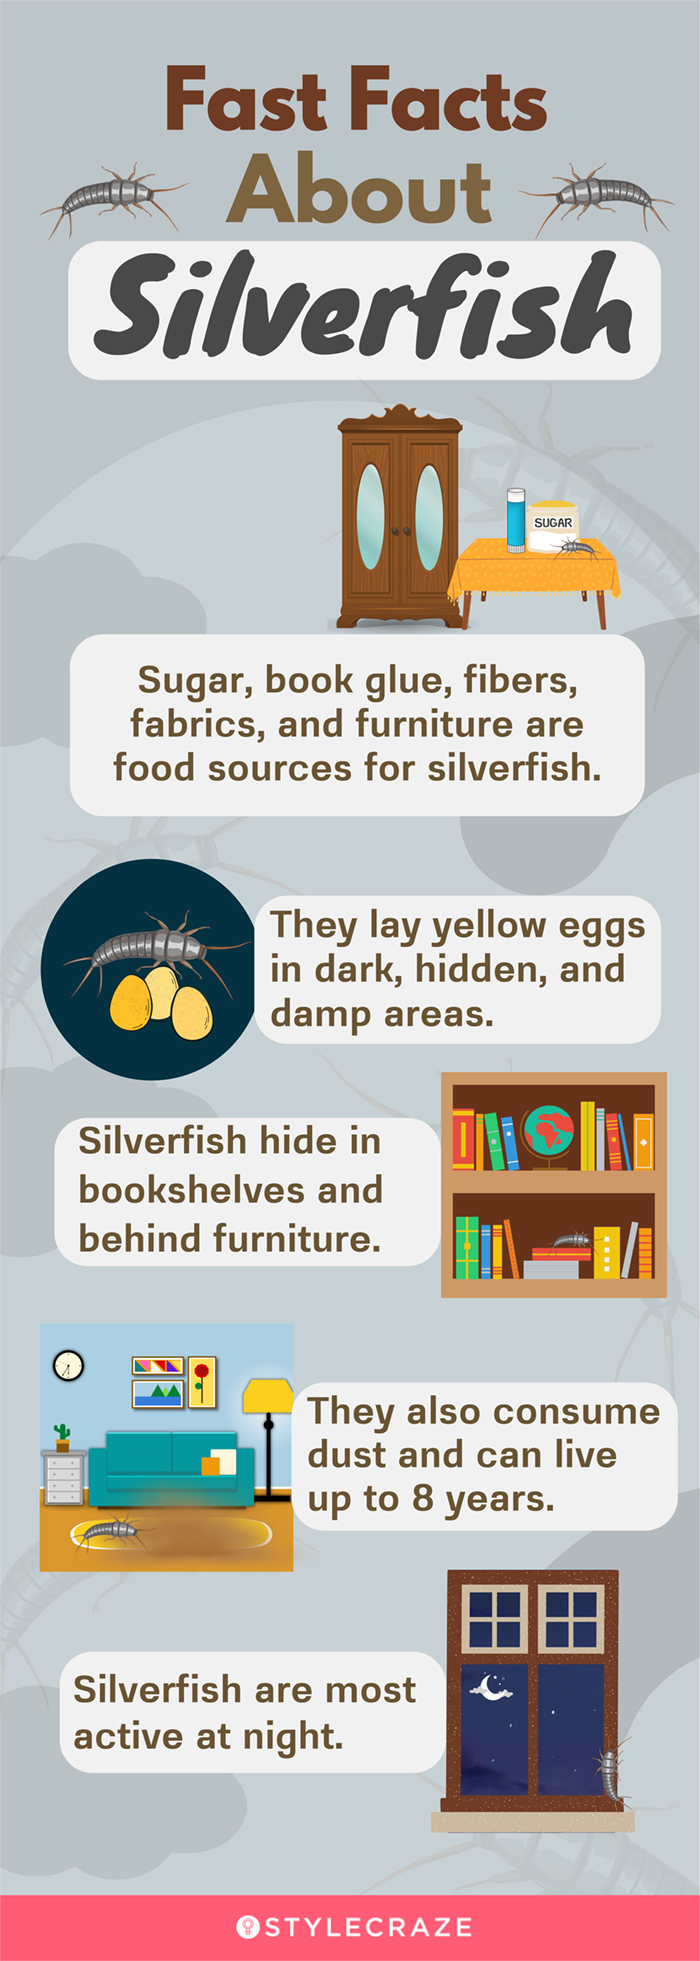 fast facts about silver fish [infographic]